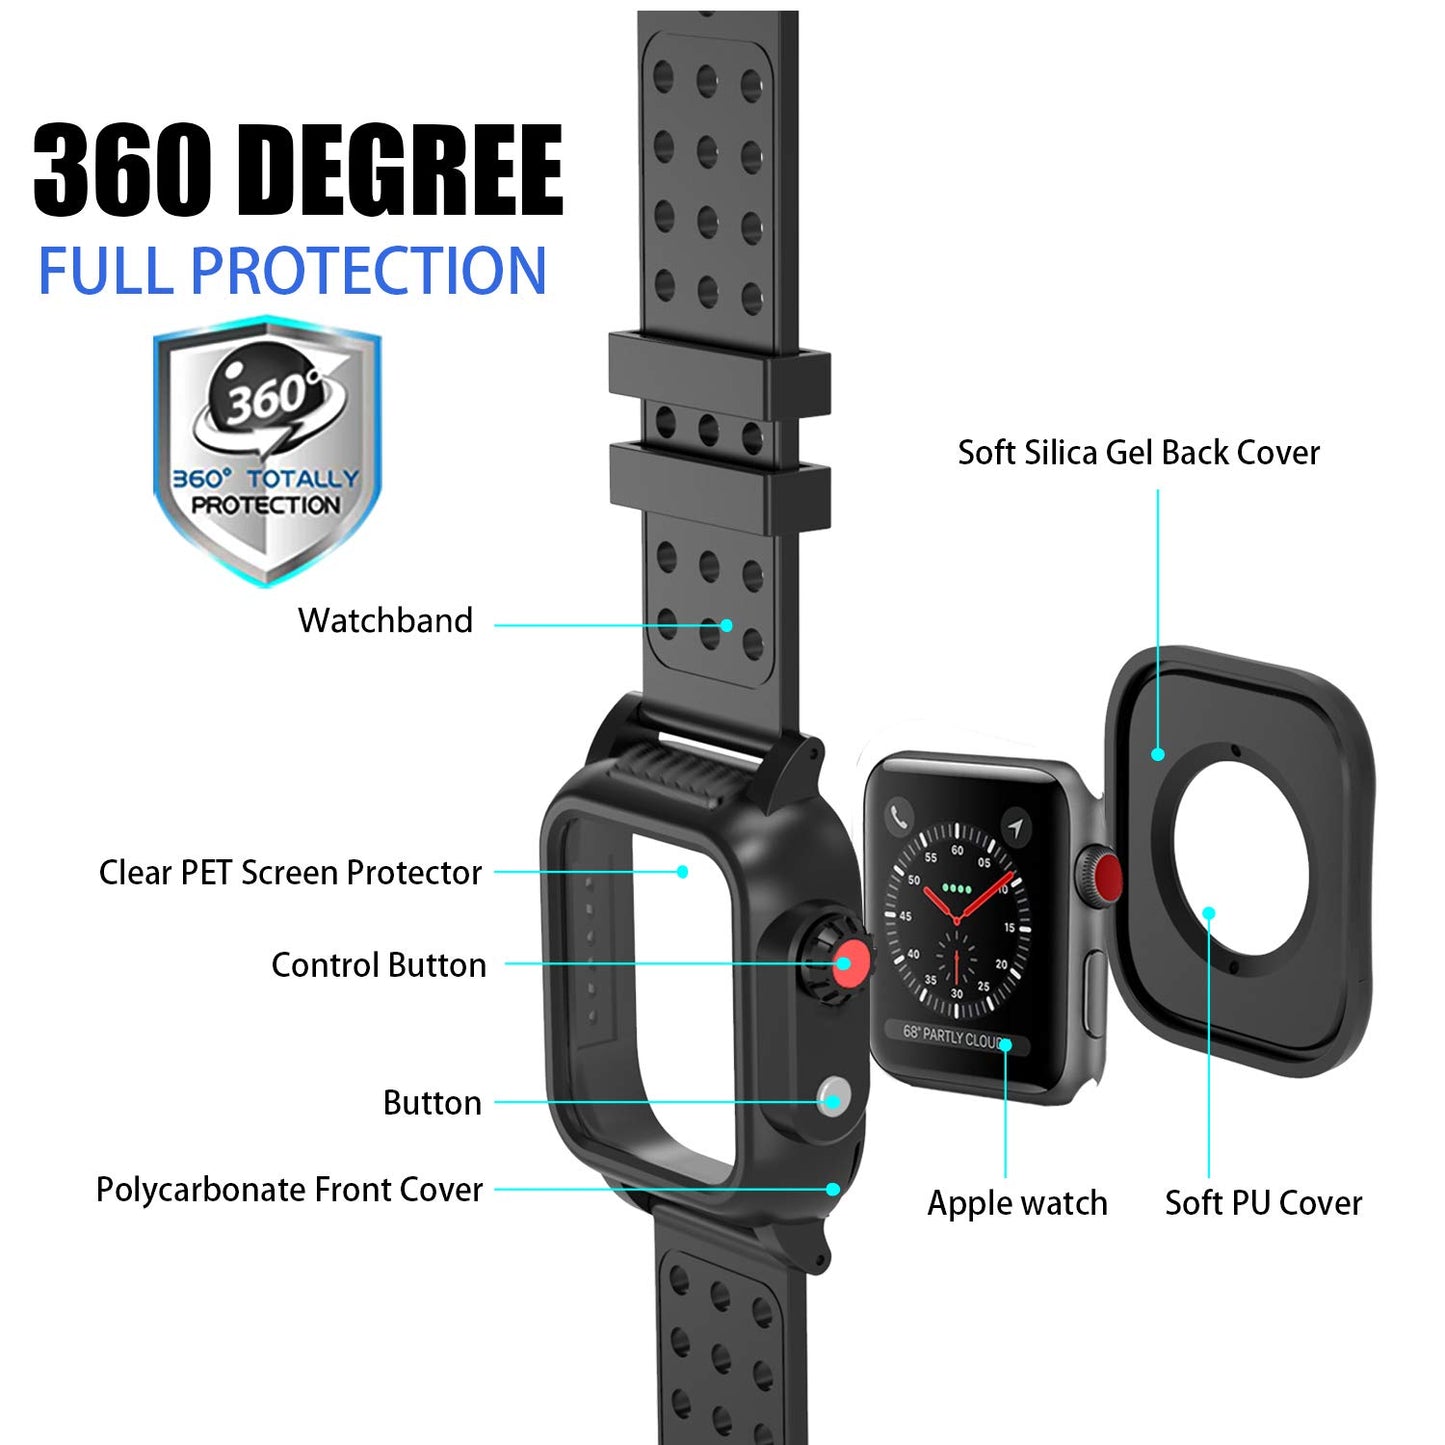 OAKTREE IP65 Waterproof Rugged Case with Premium Soft Silicone Band for Apple Watch 3 Series (42mm)